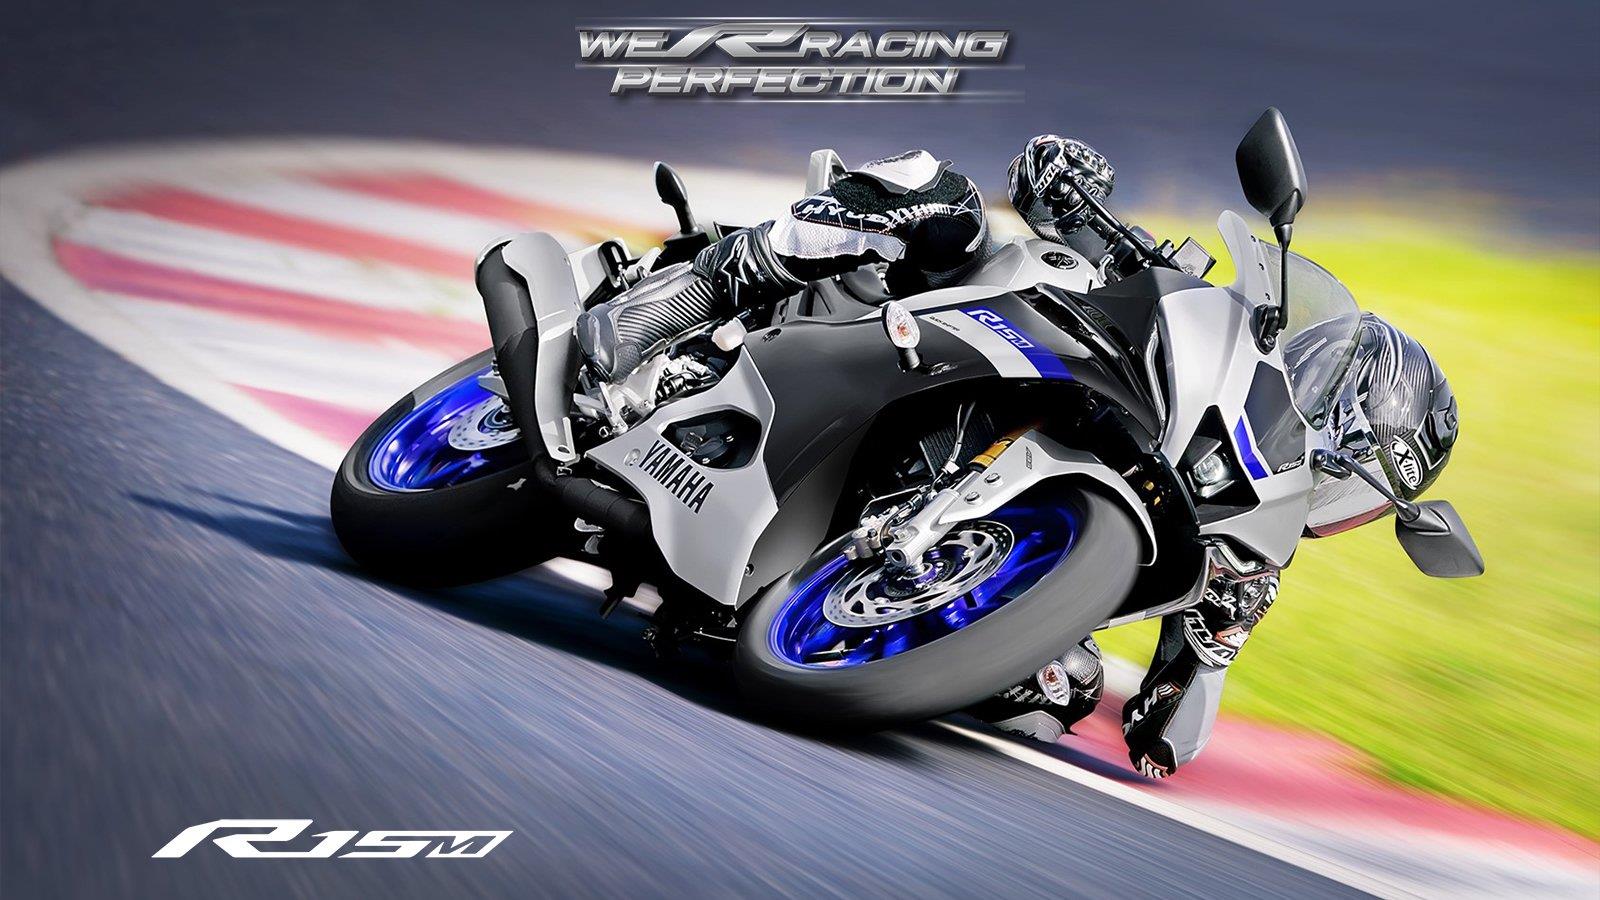 Yamaha R15 V4 and R15M Prices Increased by Rs 3000 in India Ahead of Diwali Festival - midground